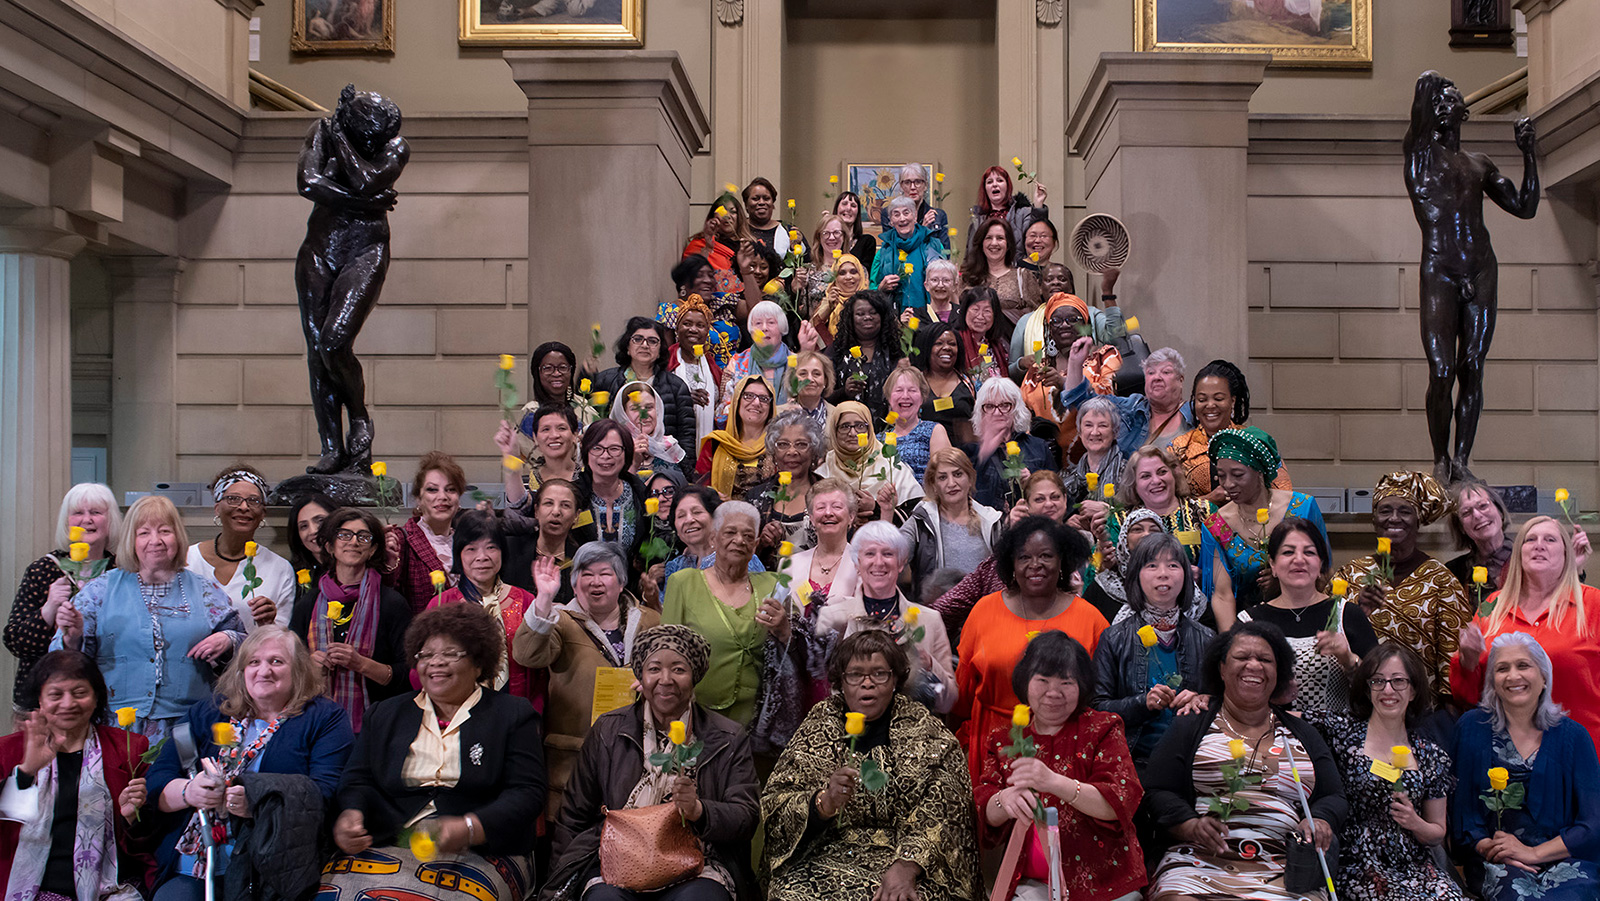 100 women of Uncertain Futures group stood on the stairs in the entrance hall, all holding a single yellow rose